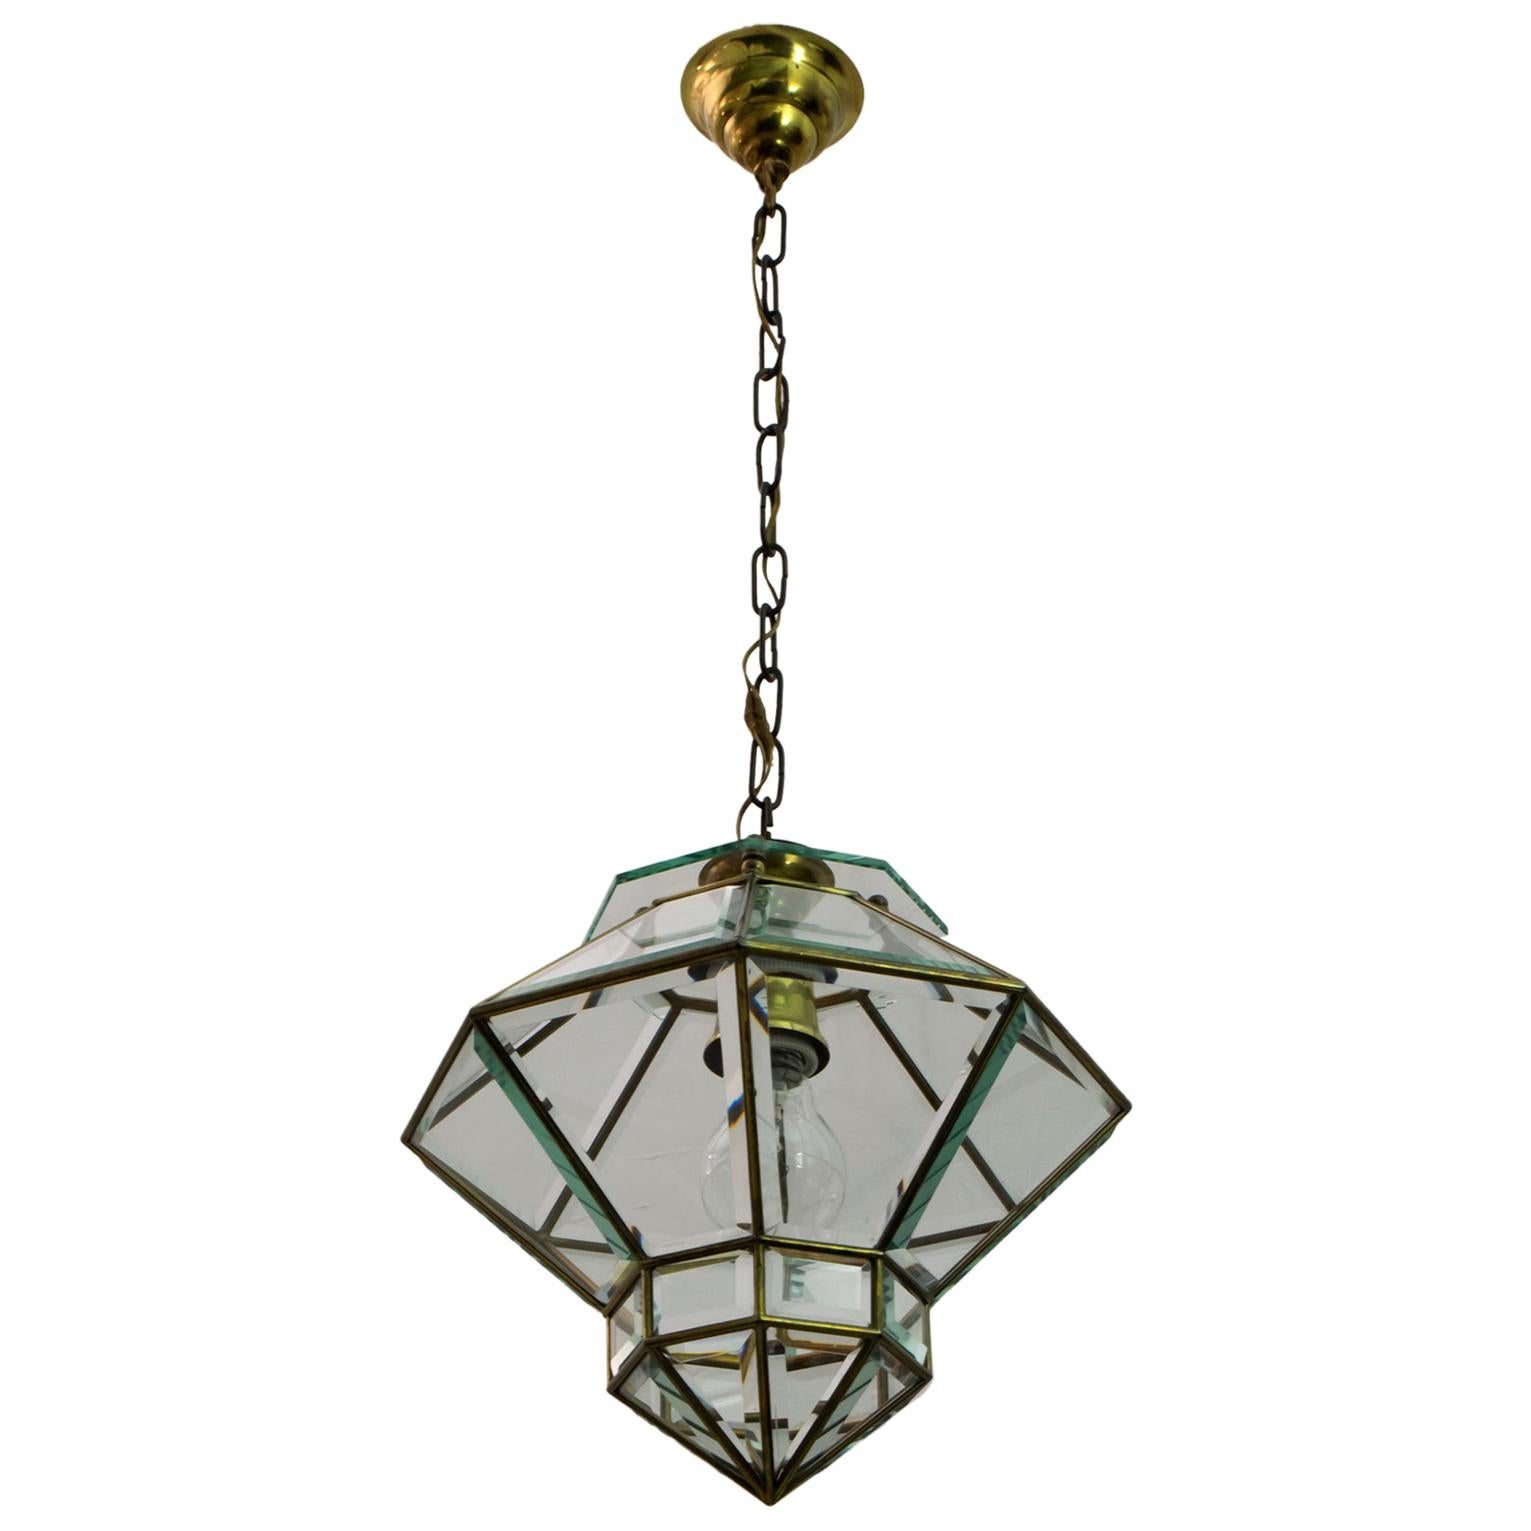 Adolf Loos Art Nouveau Brass and Beveled Glass Pendant Light for Knize, 1905